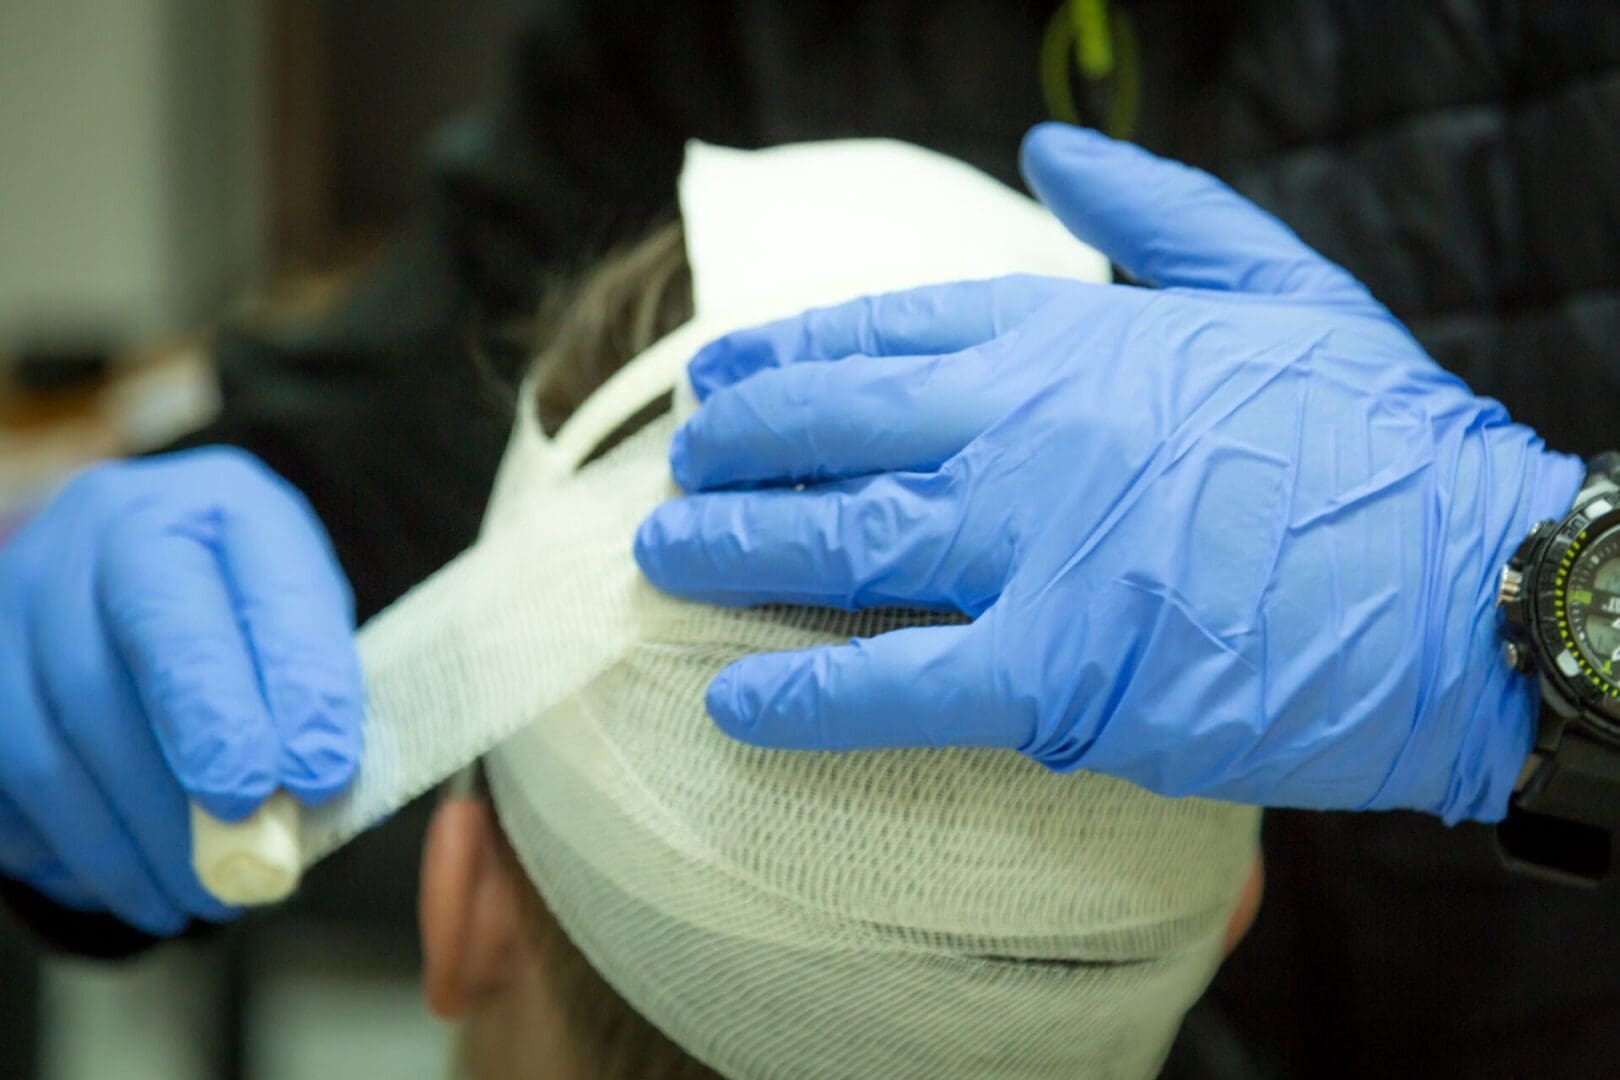 A person with blue gloves is bandaging their head.